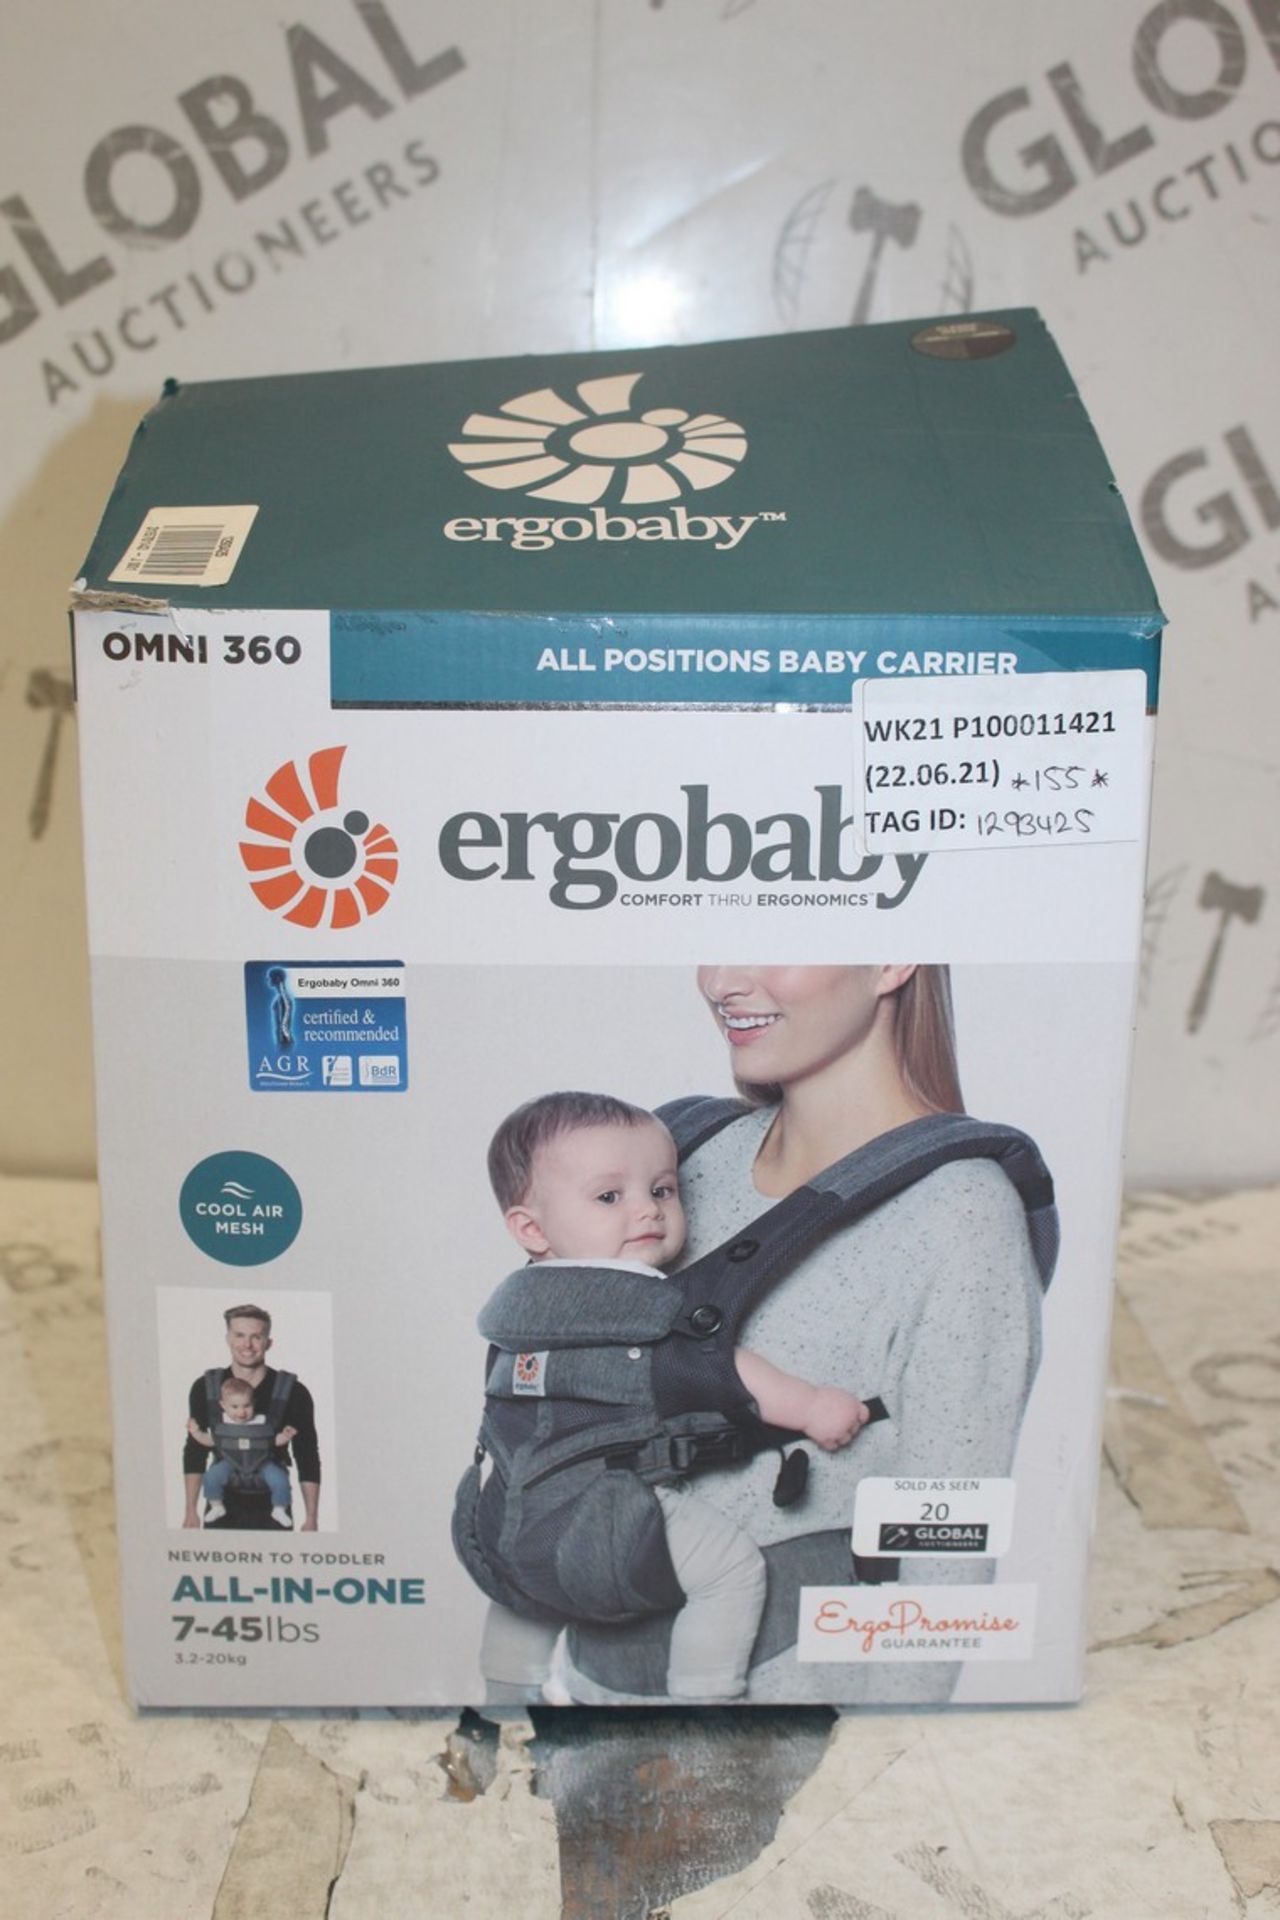 Boxed Ego Baby Omni 360 All Position Baby Carrier